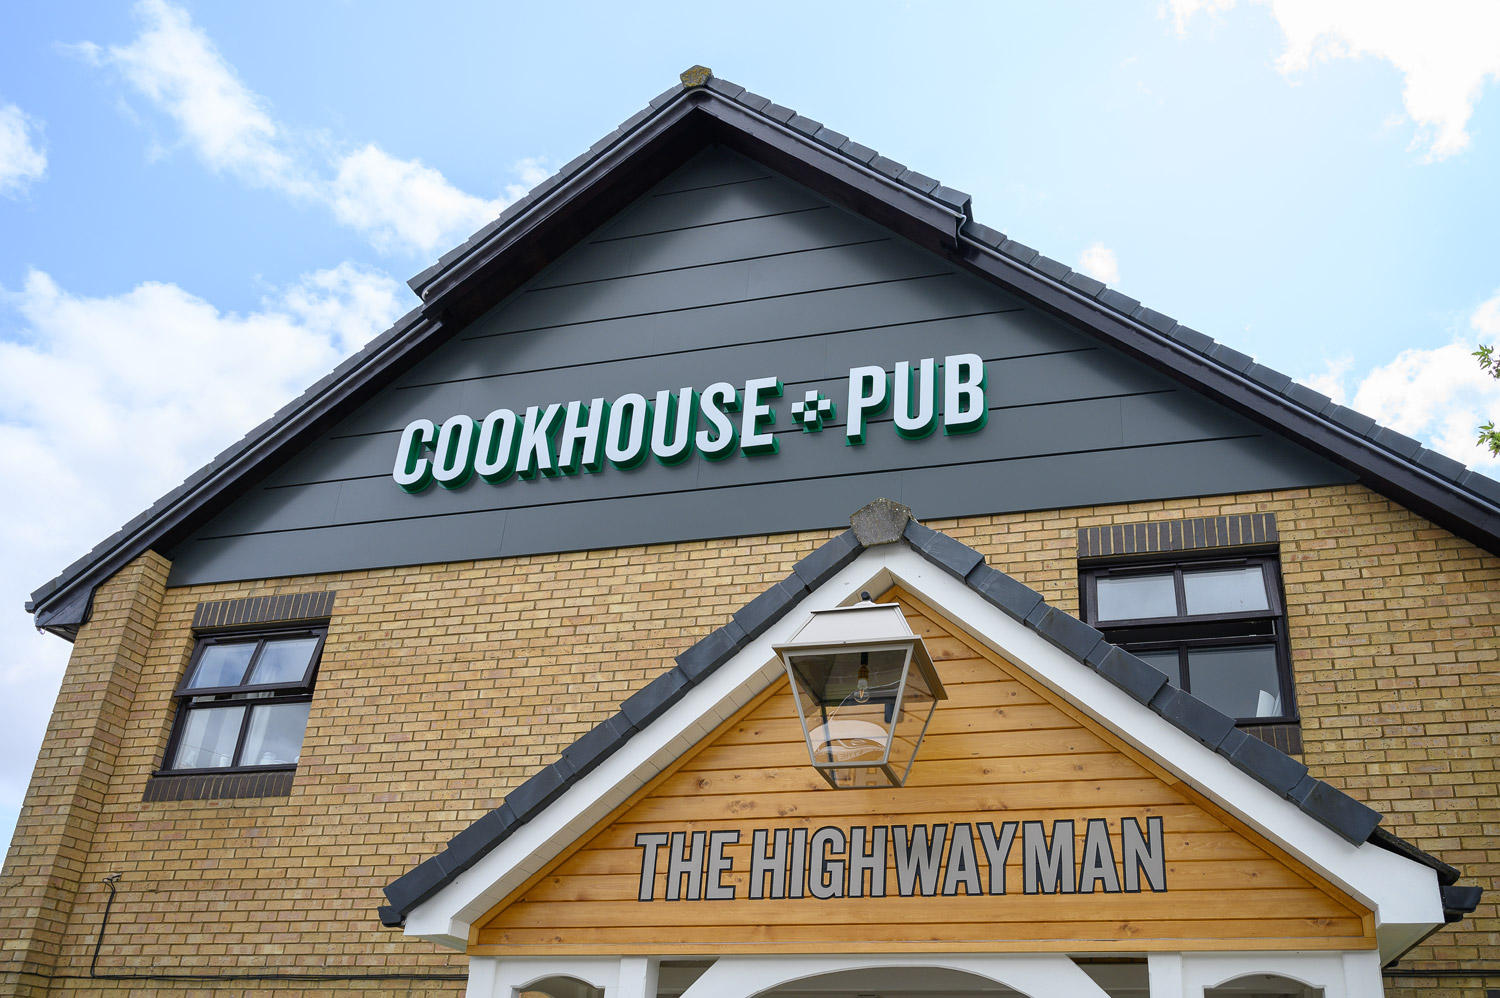 Images The Highwayman Cookhouse + Pub